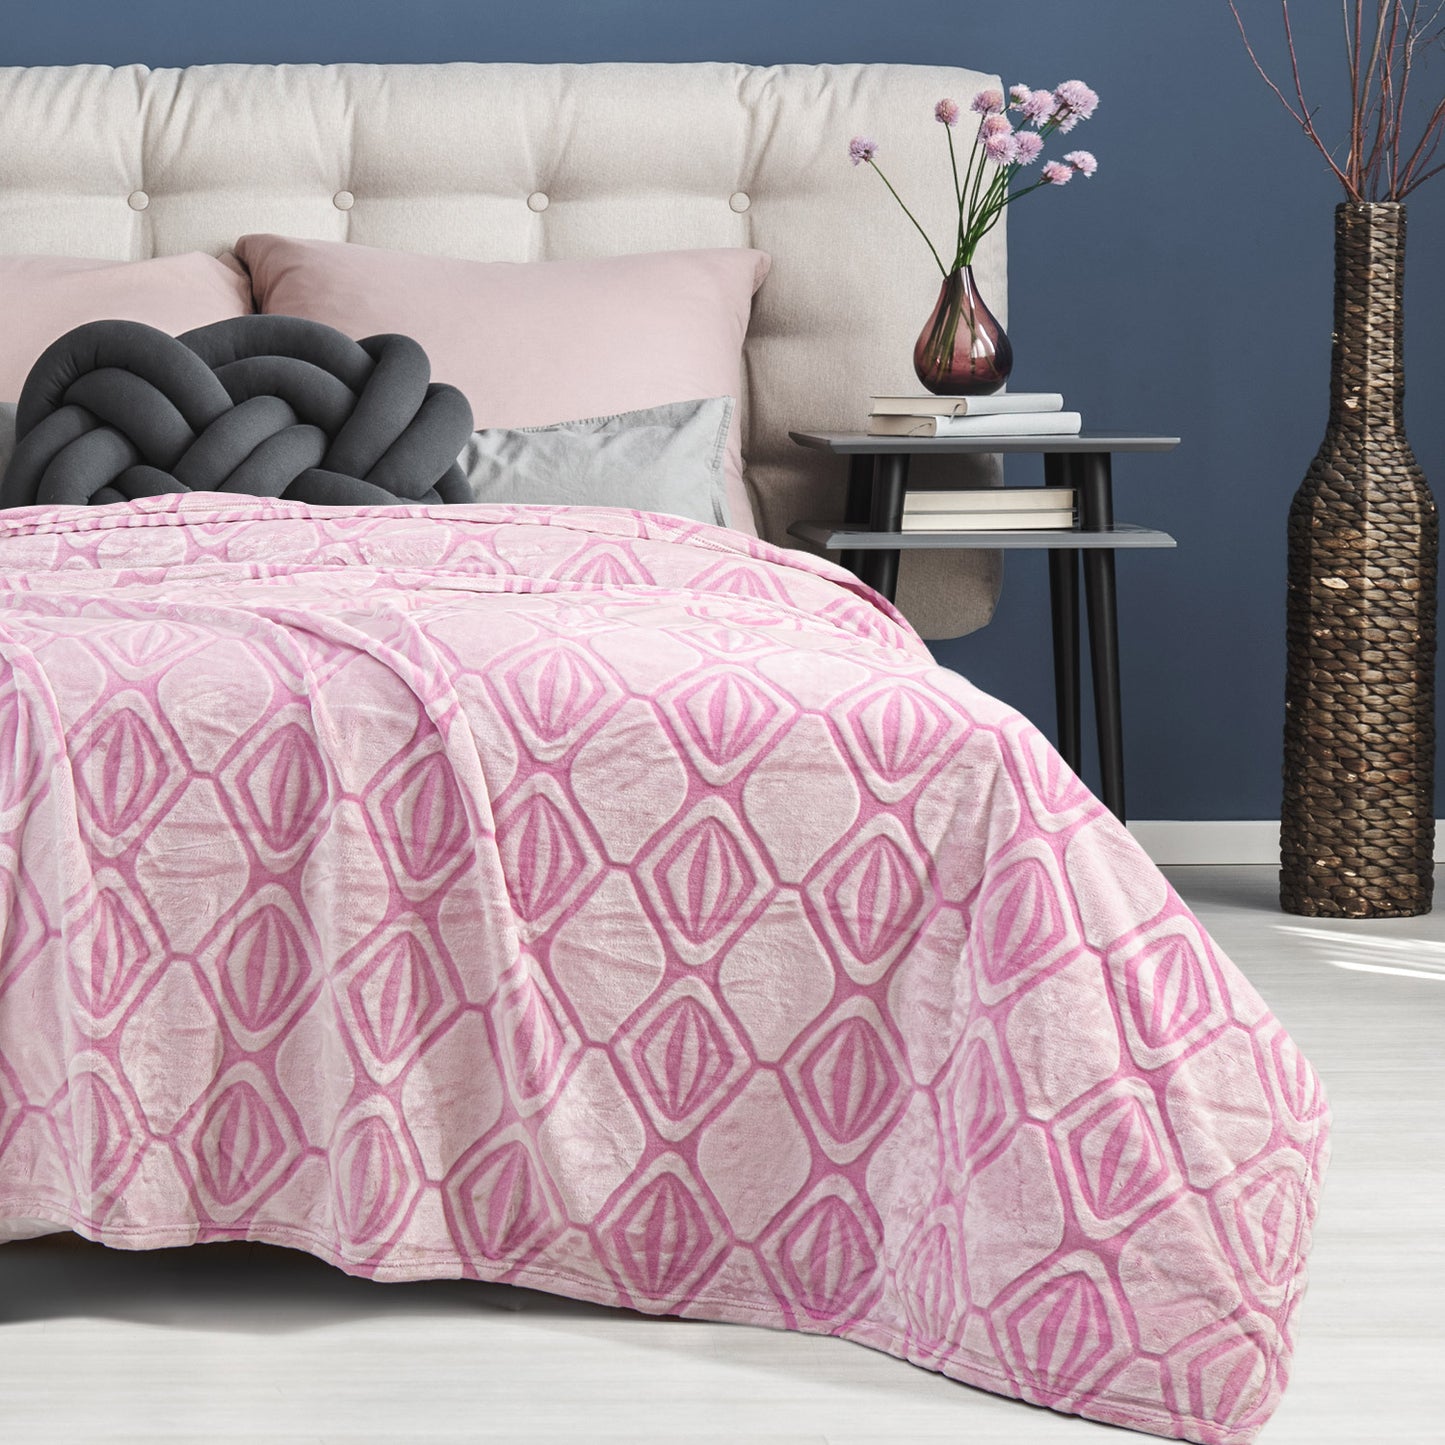 Back Printing Shaved Flannel Plush Blanket, checked Blanket for Bed or Sofa, 60" x 80", Pink